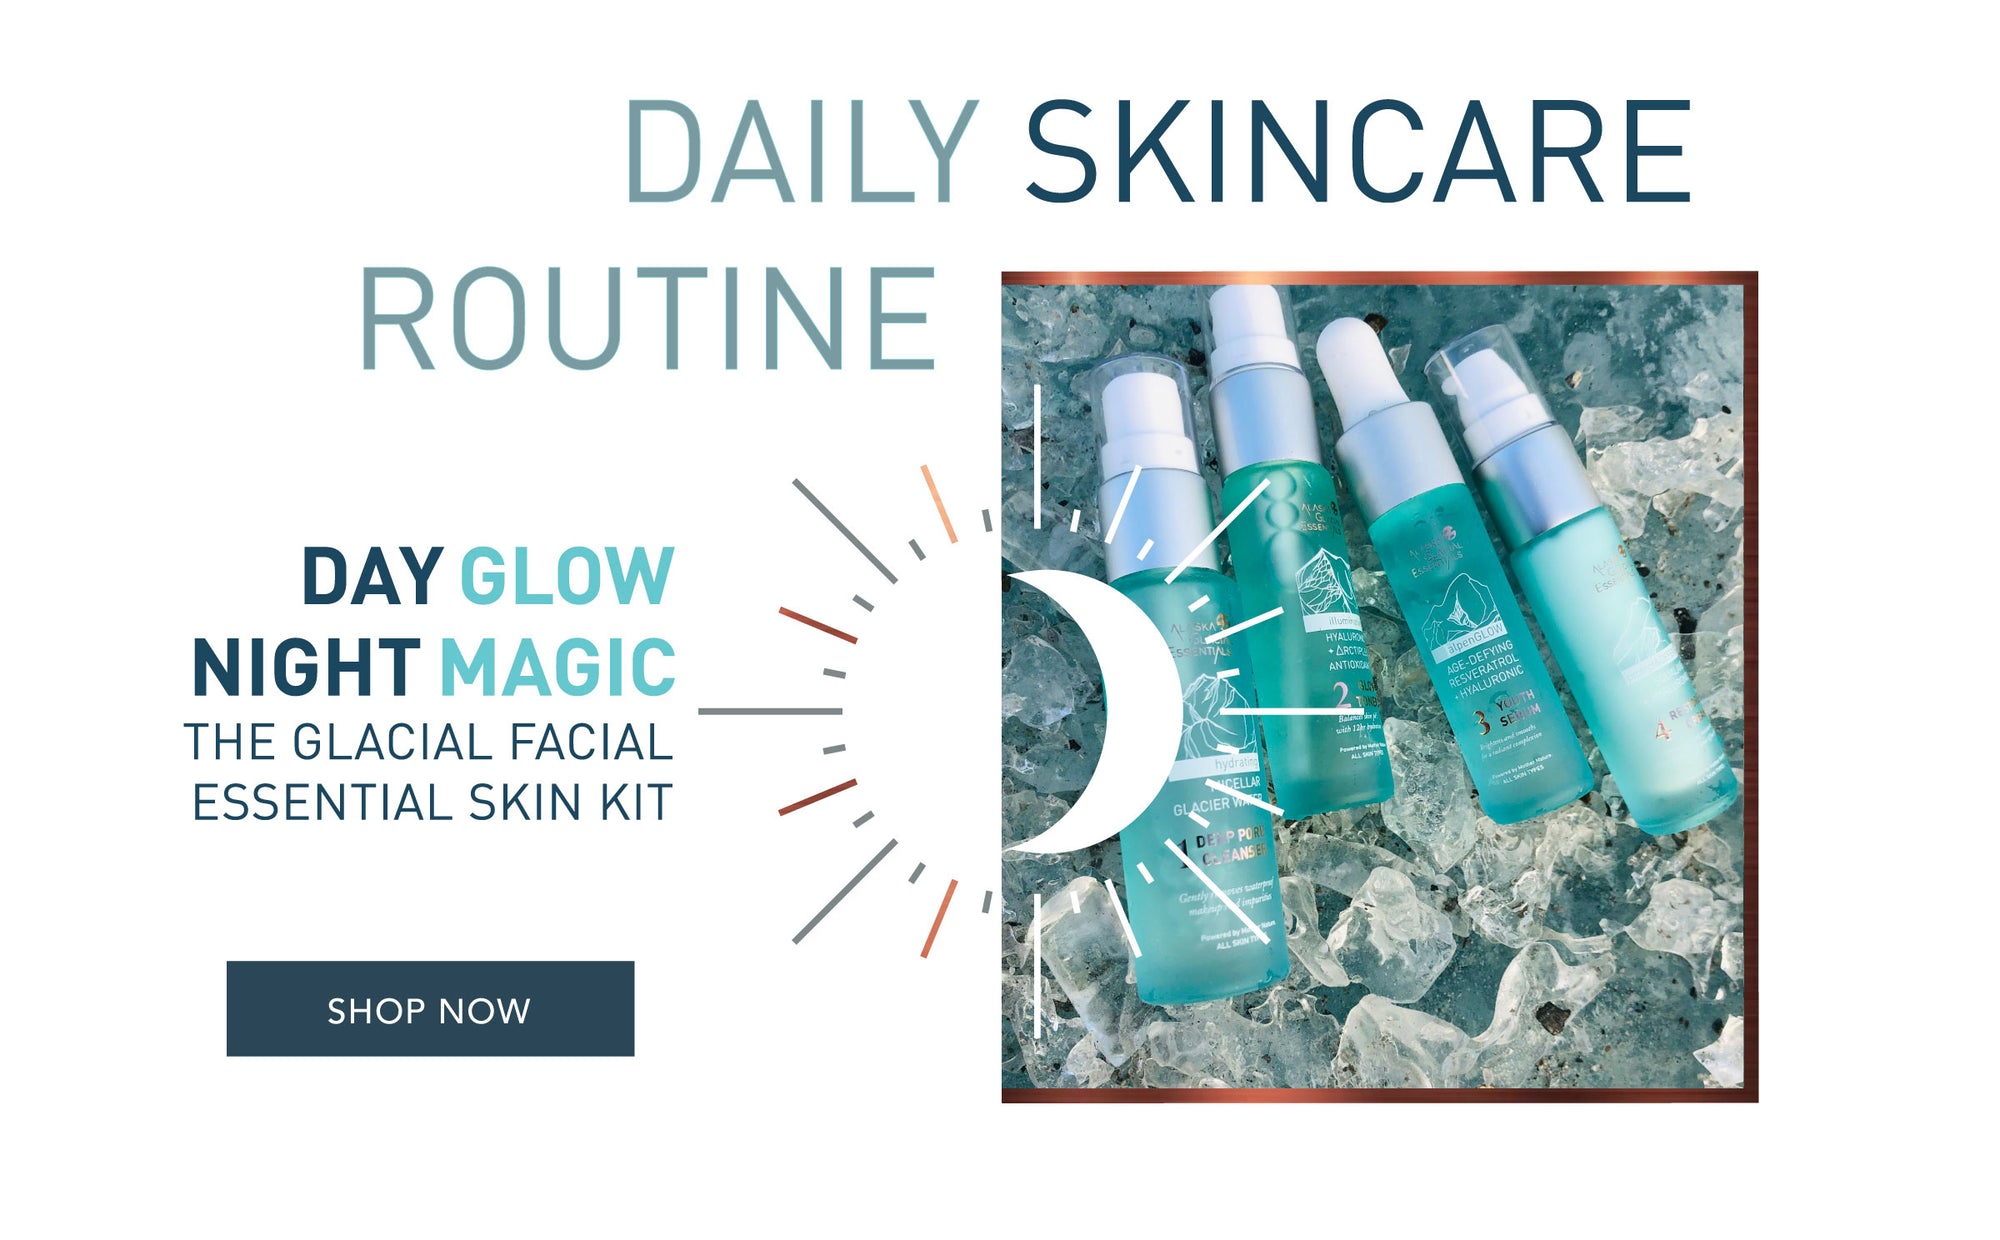 Daily skin care routine text with photo of travel size products, an am/pm sun-moon graphic with link to shop Day Glow Night Magic Glacial Facial Essential Skin kit